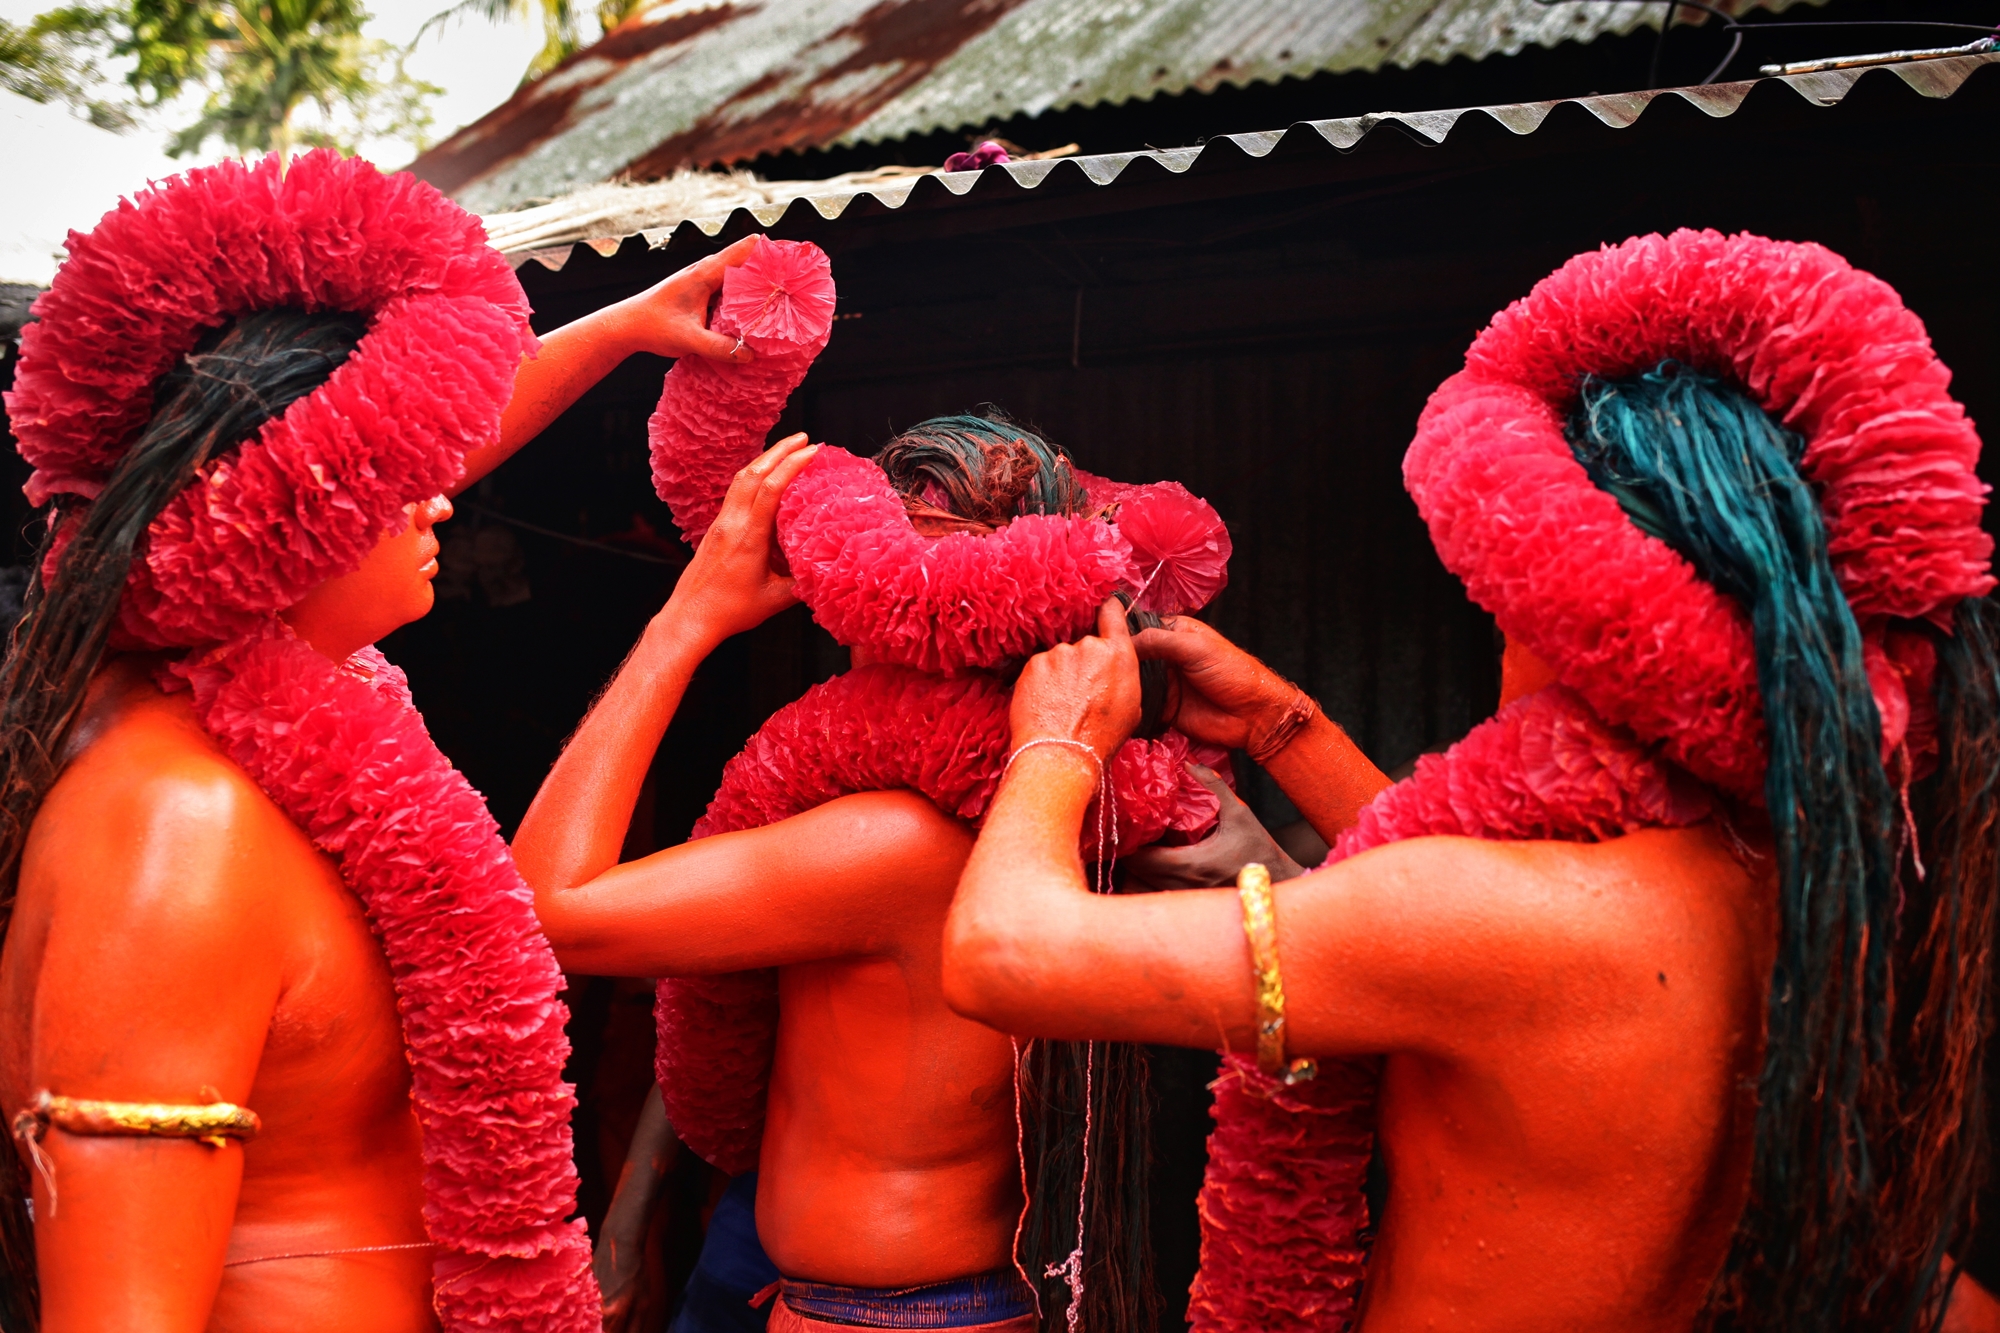 Participants in a Lal Kach festival procession get ready for the event. The Hindu youth and men paint themselves with red color and attend a procession holding swords as they show power against evil and welcome the Bengali New Year.